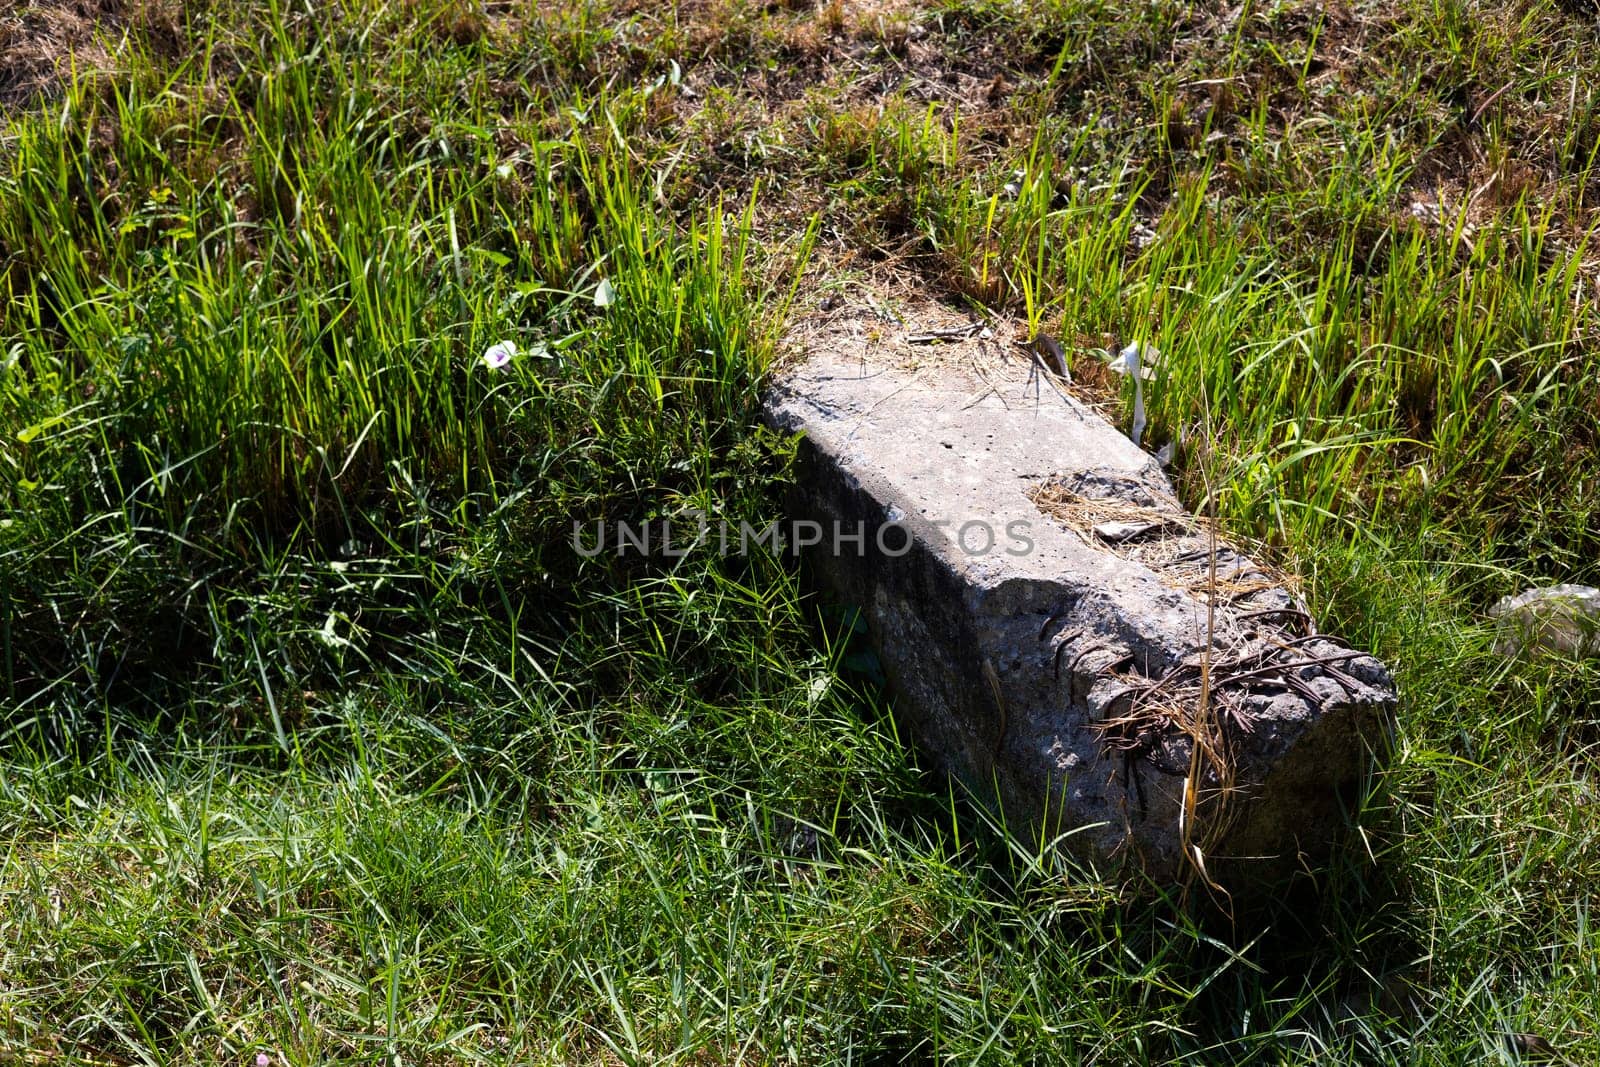 Concrete Pillars Lying On The Ground With Grass Growing And Dead Leaves by urzine